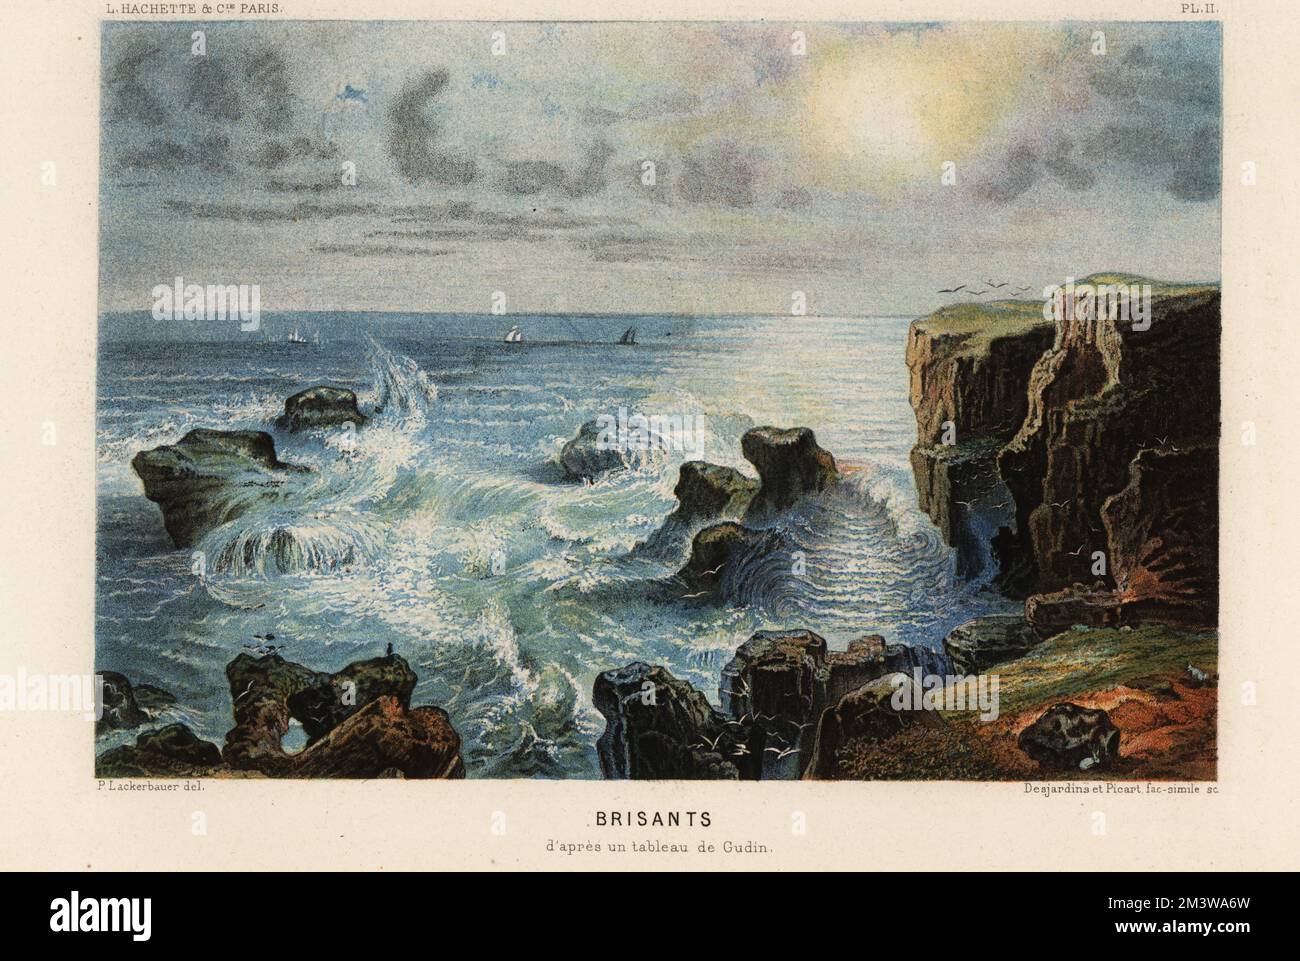 Landscape of a rough sea with waves crashing on rocks by marine artist Theodore Gudin. Brisants d'apres un tableau de Gudin. Chromolithograph by Pierre Lackerbauer from Alfred Fredol’s Le Monde de la Mer, the World of the Sea, edited by Olivier Fredol, Librairie Hachette et. Cie., Paris, 1881. Alfred Fredol was the pseudonym of French zoologist and botanist Alfred Moquin-Tandon, 1804-1863. Stock Photo